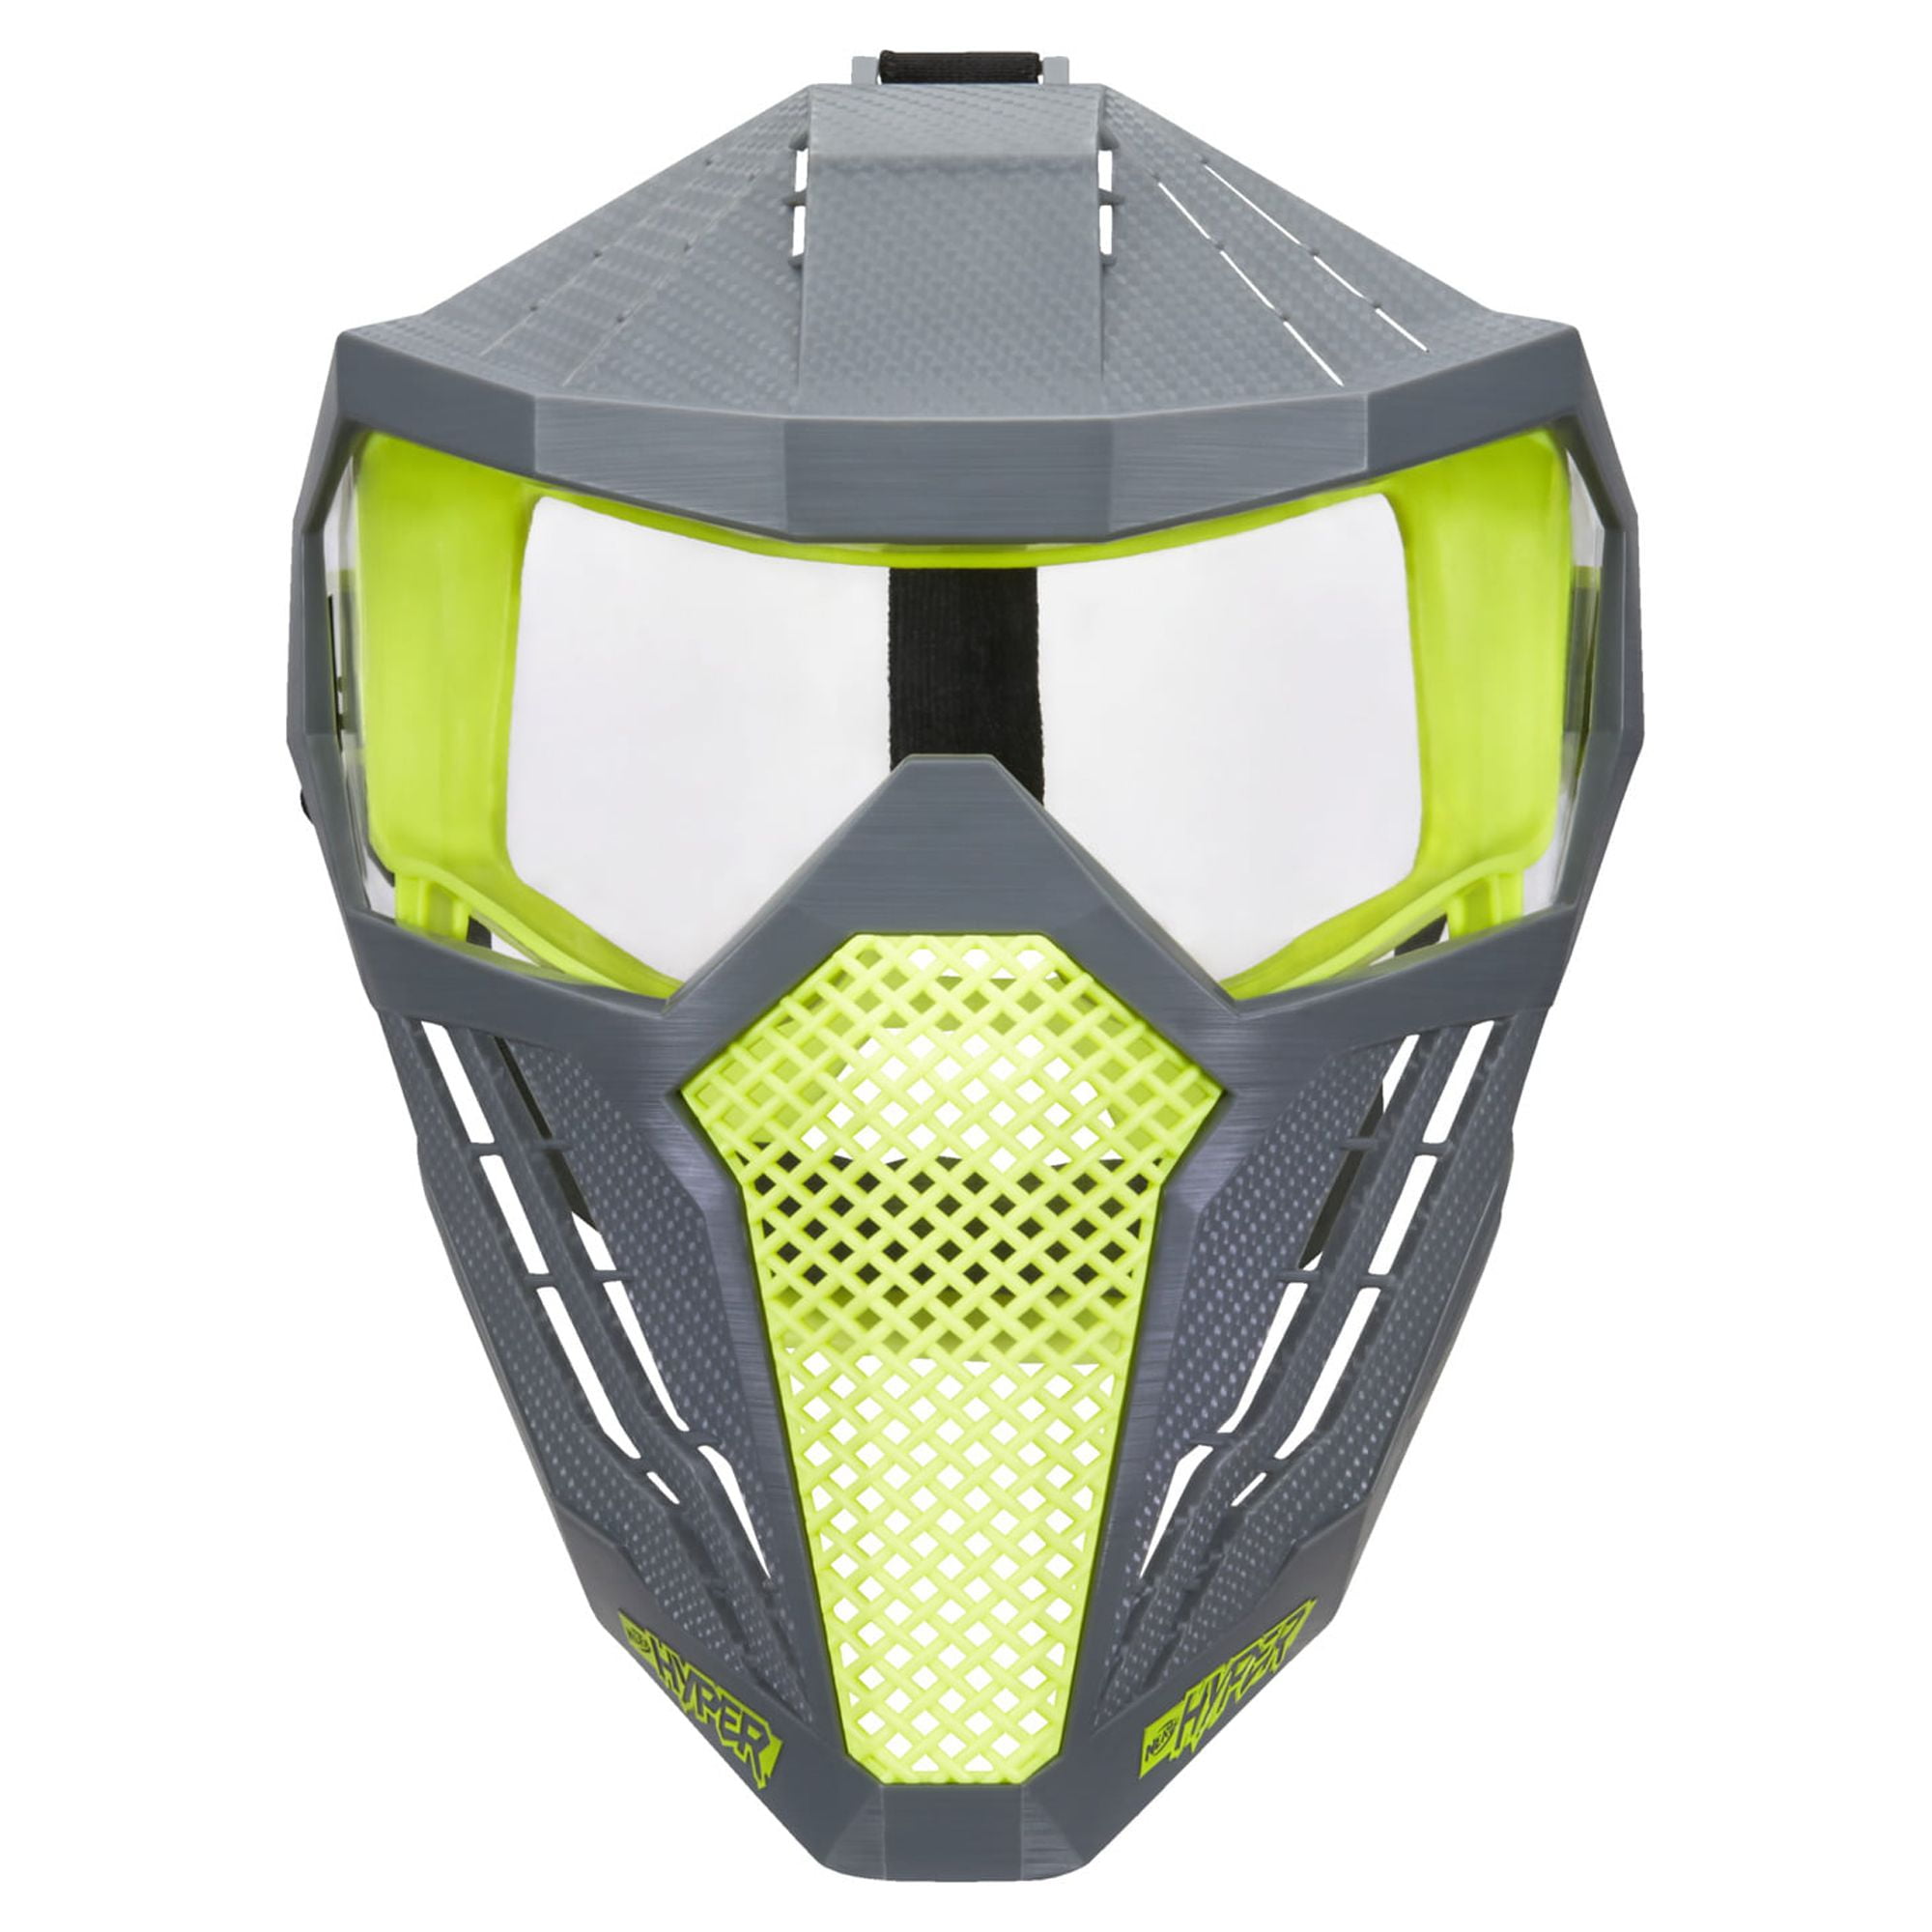 Nerf Rival Phantom Corps Face Mask, White Color Scheme, Breathable Design,  Adjustable Band, Nerf Accessories for 14 Year Old Boys and Girls